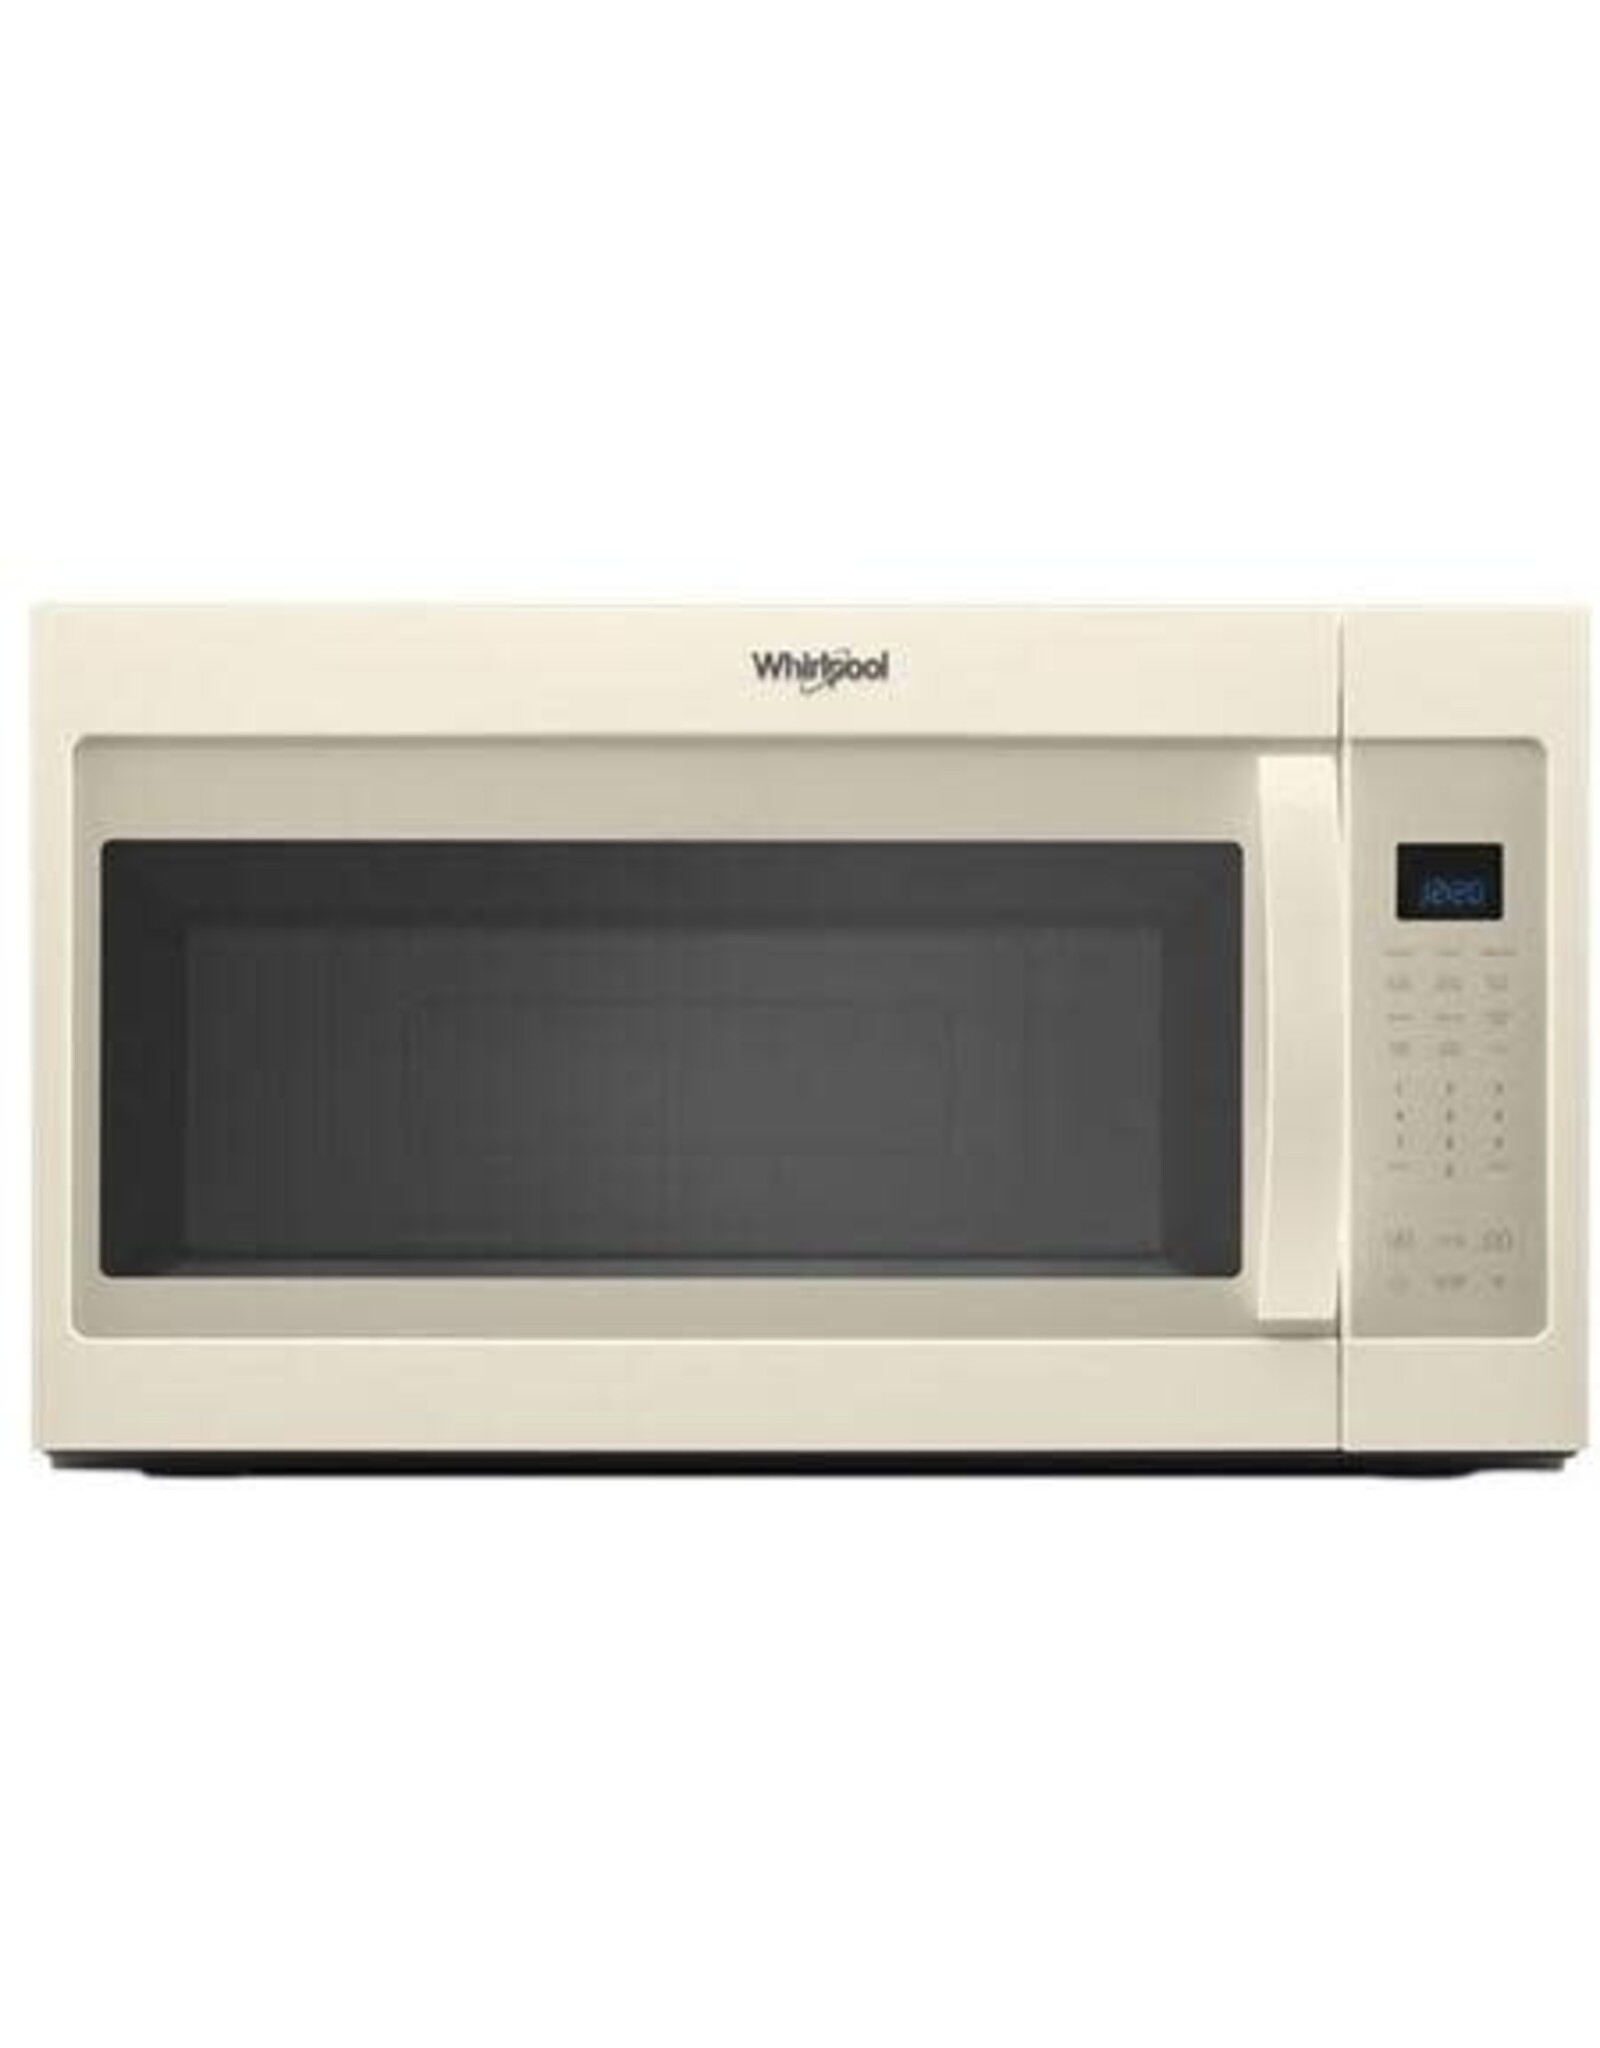 WMH32519HT WHR Microwave, Hood, Combination – 1.9 CU FT, 1000 WATTS, 2-PIECE FRONT, SE